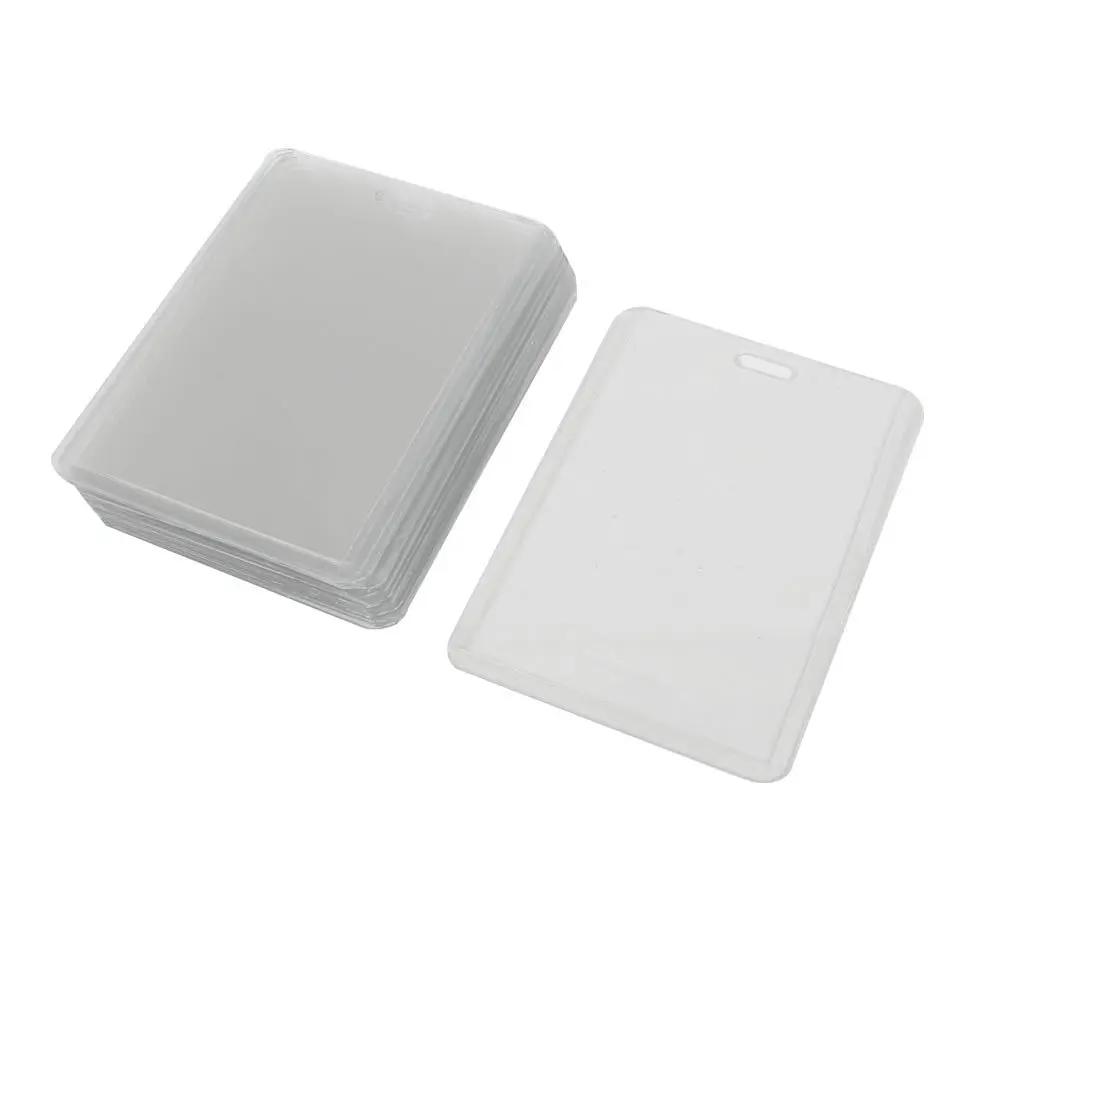 Cheap Plastic Business Card Holders Wholesale, find Plastic Business Card Holders Wholesale ...